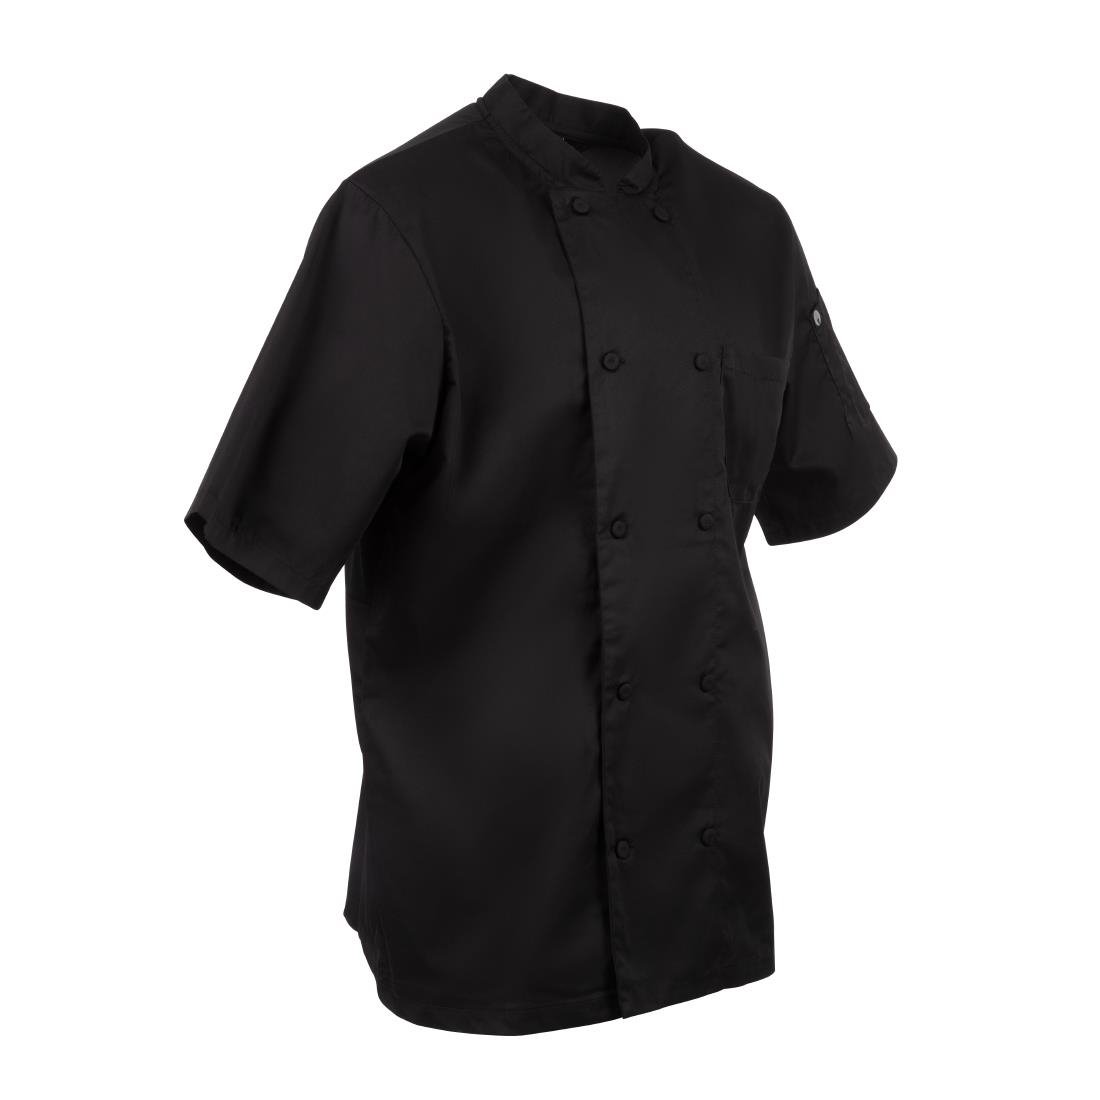 B054-S Chefs Works Montreal Cool Vent Unisex Short Sleeve Chefs Jacket Black S